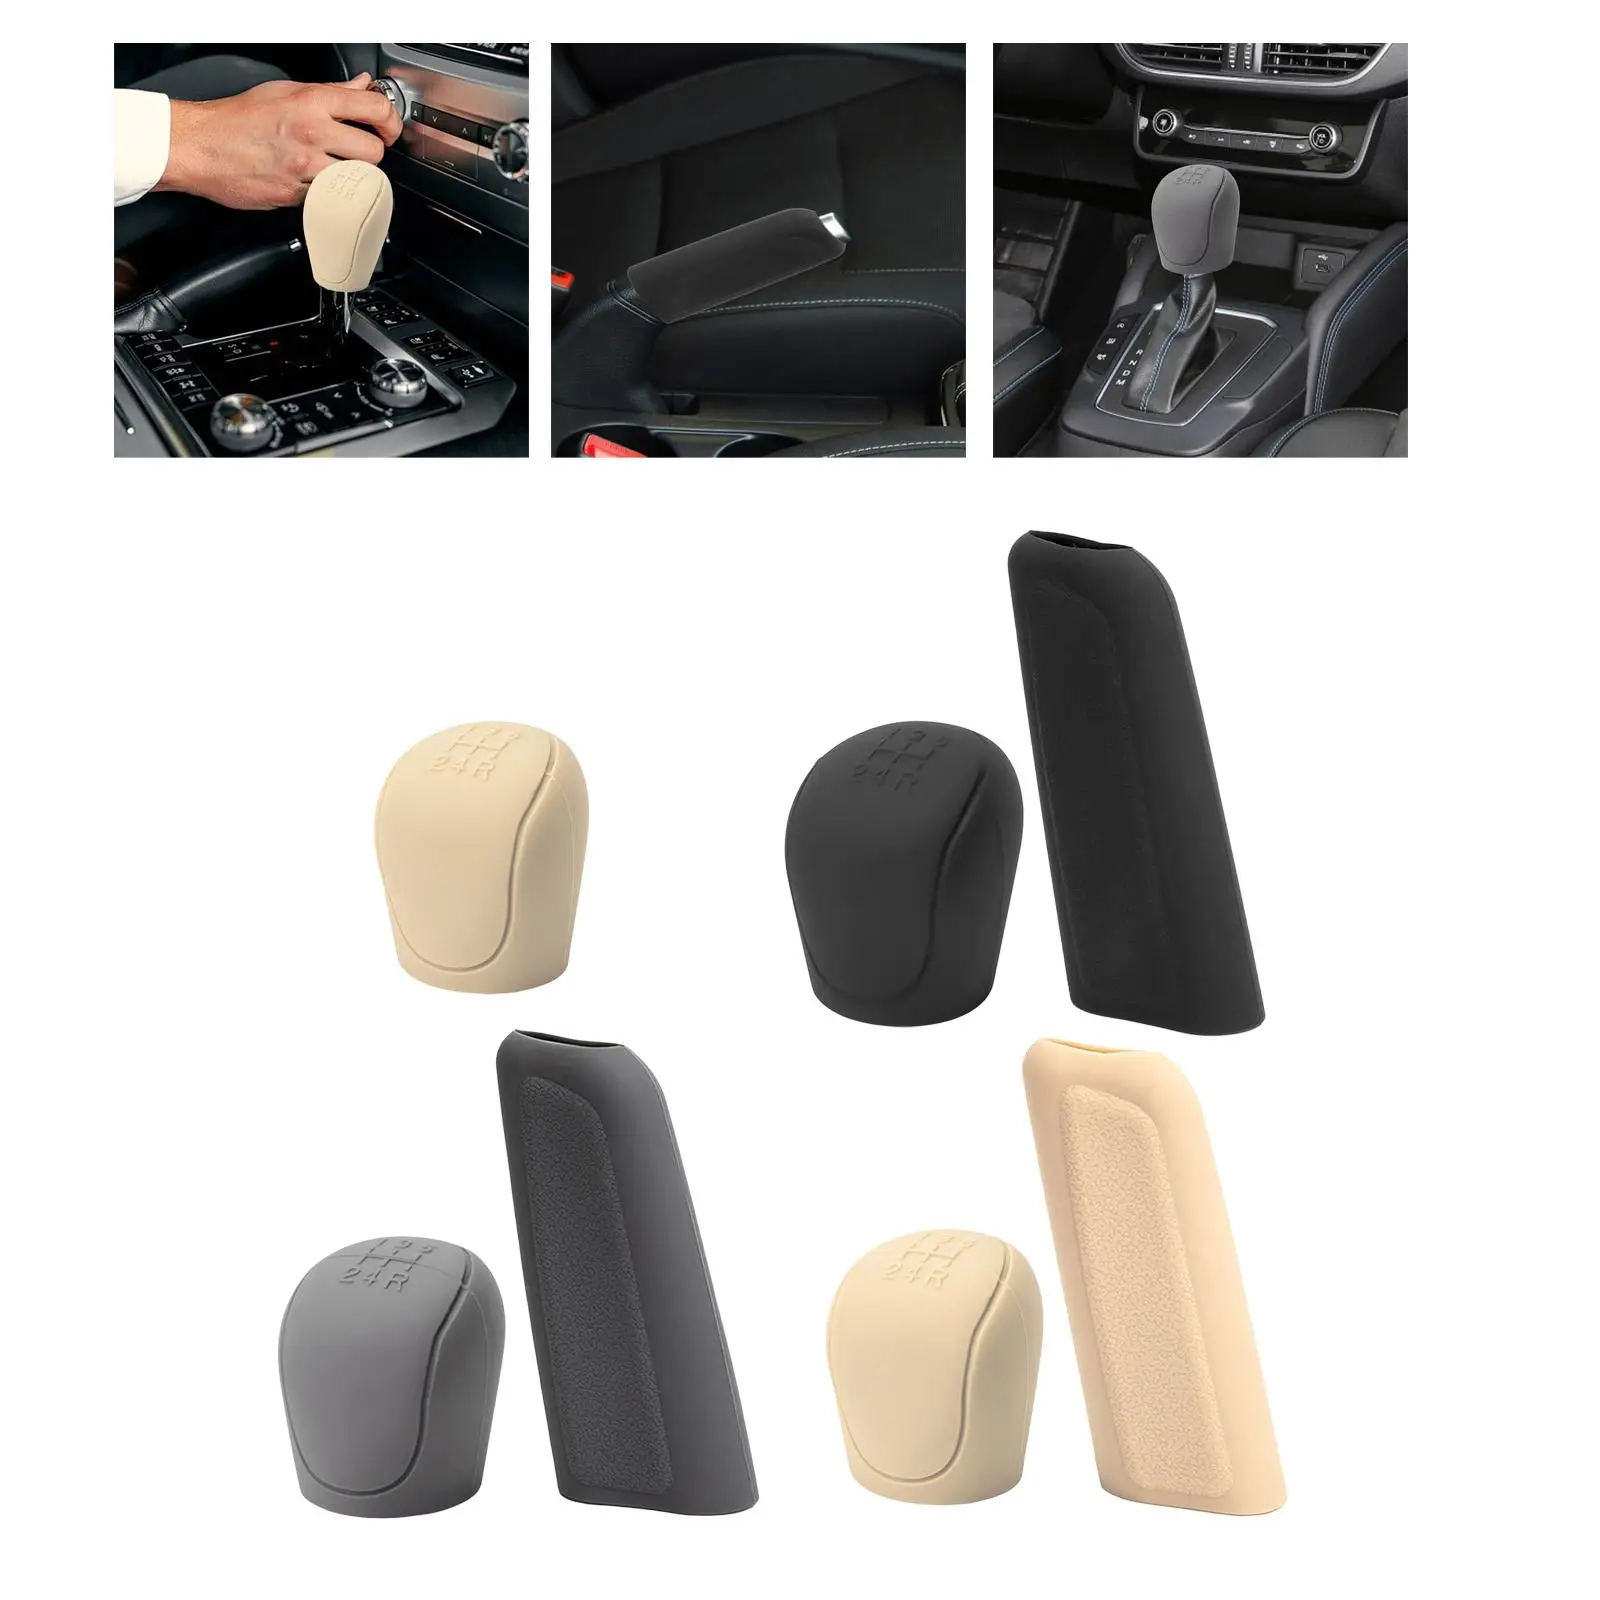 Vehicle Gear Shift Cover Dustproof Protective Hand Brake Sleeve Protector for Ford Focus Transit Escort Accessory